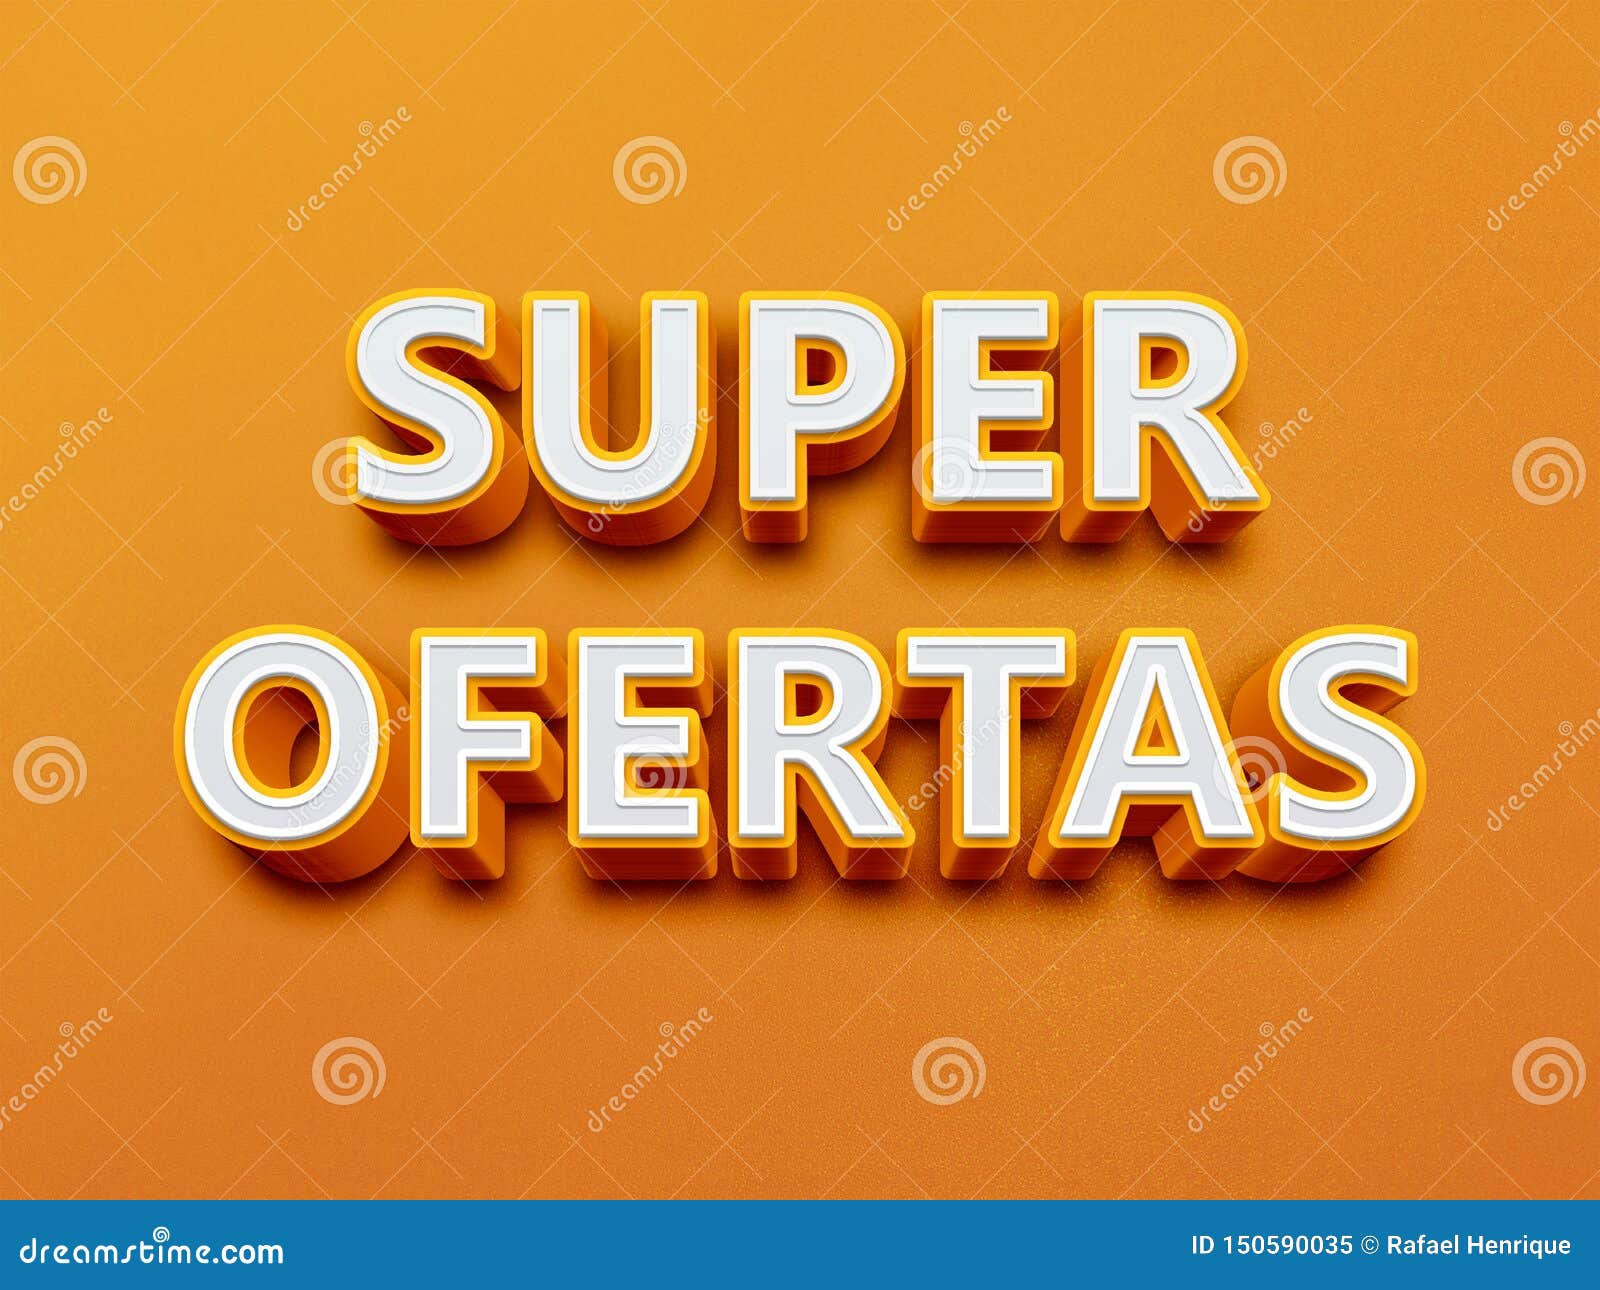 promotional stamp `super offers`.  of brazil with text for retail campaigns in portuguese. 3d